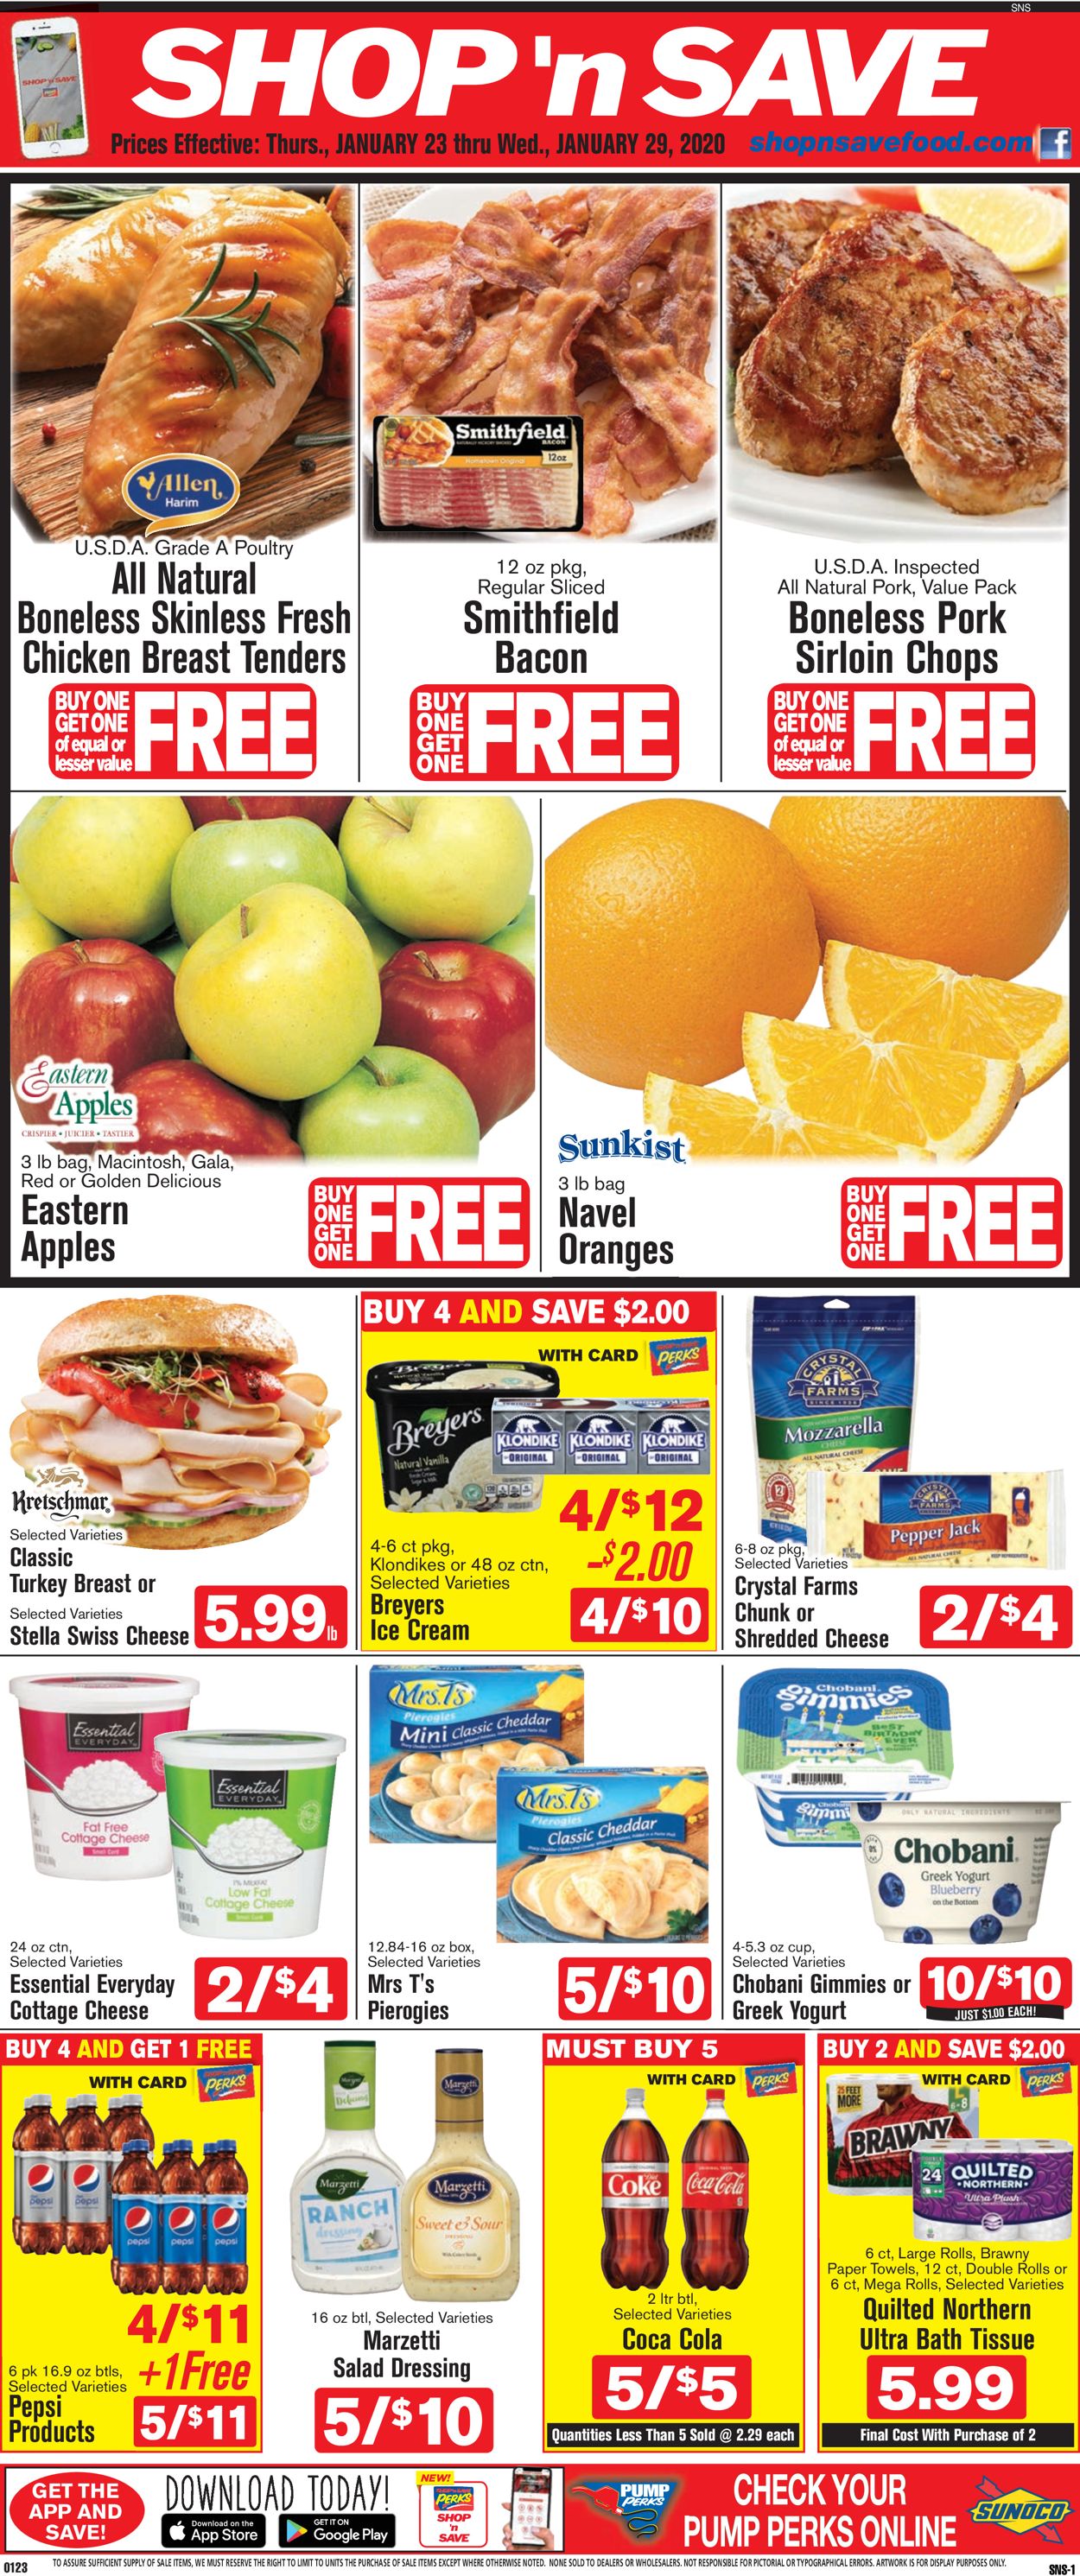 Shop ‘n Save (Pittsburgh) Ad from 01/23/2020